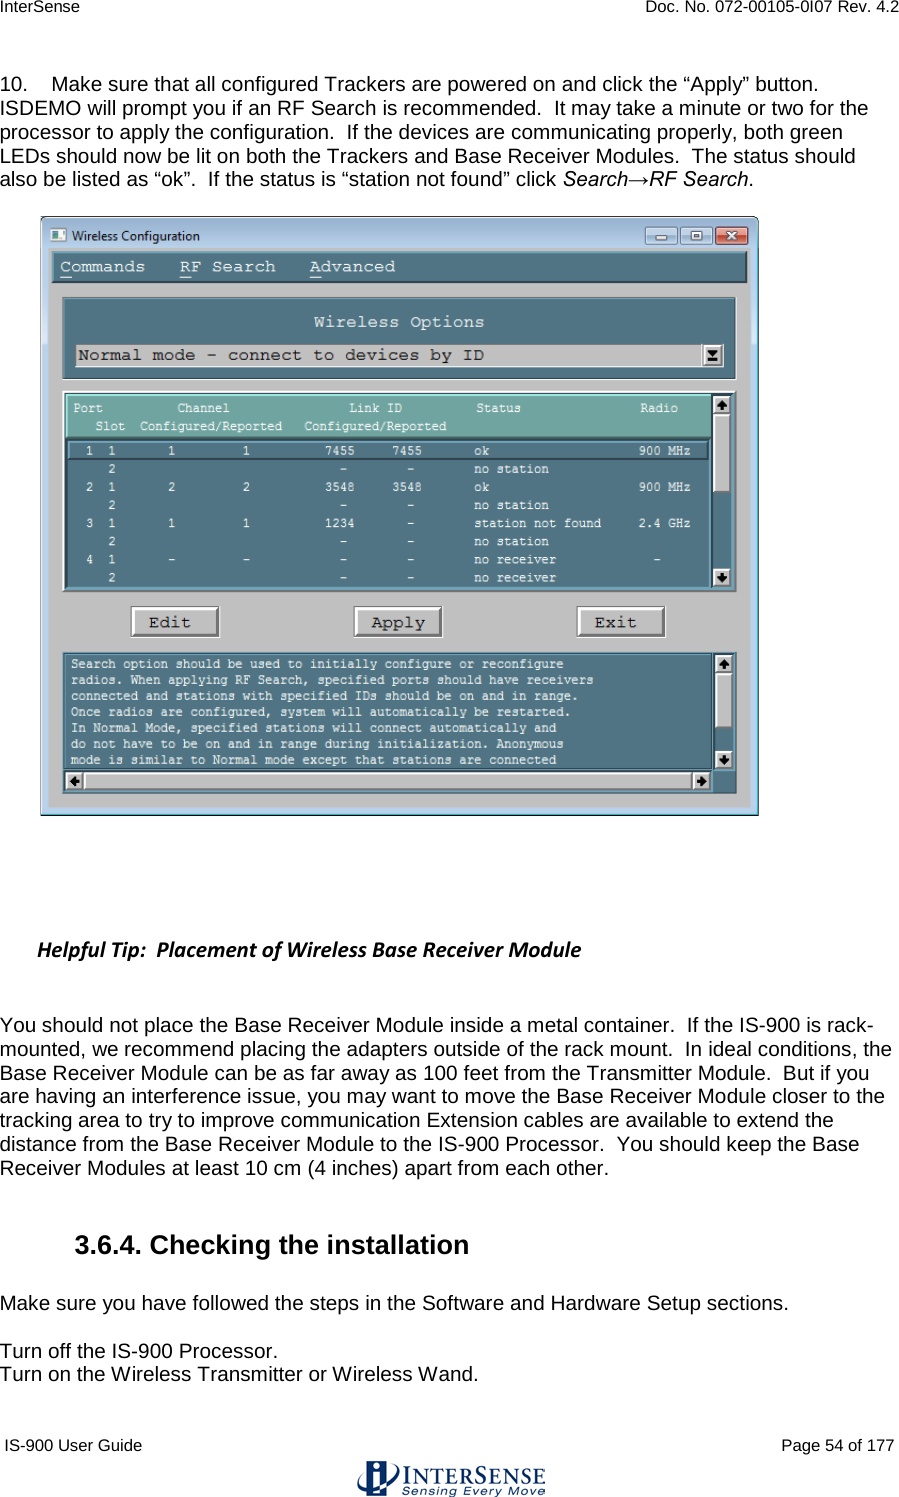 InterSense    Doc. No. 072-00105-0I07 Rev. 4.2 IS-900 User Guide                                                                                                                                          Page 54 of 177  10.    Make sure that all configured Trackers are powered on and click the “Apply” button.  ISDEMO will prompt you if an RF Search is recommended.  It may take a minute or two for the processor to apply the configuration.  If the devices are communicating properly, both green LEDs should now be lit on both the Trackers and Base Receiver Modules.  The status should also be listed as “ok”.  If the status is “station not found” click Search→RF Search.       Helpful Tip:  Placement of Wireless Base Receiver Module  You should not place the Base Receiver Module inside a metal container.  If the IS-900 is rack-mounted, we recommend placing the adapters outside of the rack mount.  In ideal conditions, the Base Receiver Module can be as far away as 100 feet from the Transmitter Module.  But if you are having an interference issue, you may want to move the Base Receiver Module closer to the tracking area to try to improve communication Extension cables are available to extend the distance from the Base Receiver Module to the IS-900 Processor.  You should keep the Base Receiver Modules at least 10 cm (4 inches) apart from each other.  3.6.4. Checking the installation  Make sure you have followed the steps in the Software and Hardware Setup sections.   Turn off the IS-900 Processor. Turn on the Wireless Transmitter or Wireless Wand. 